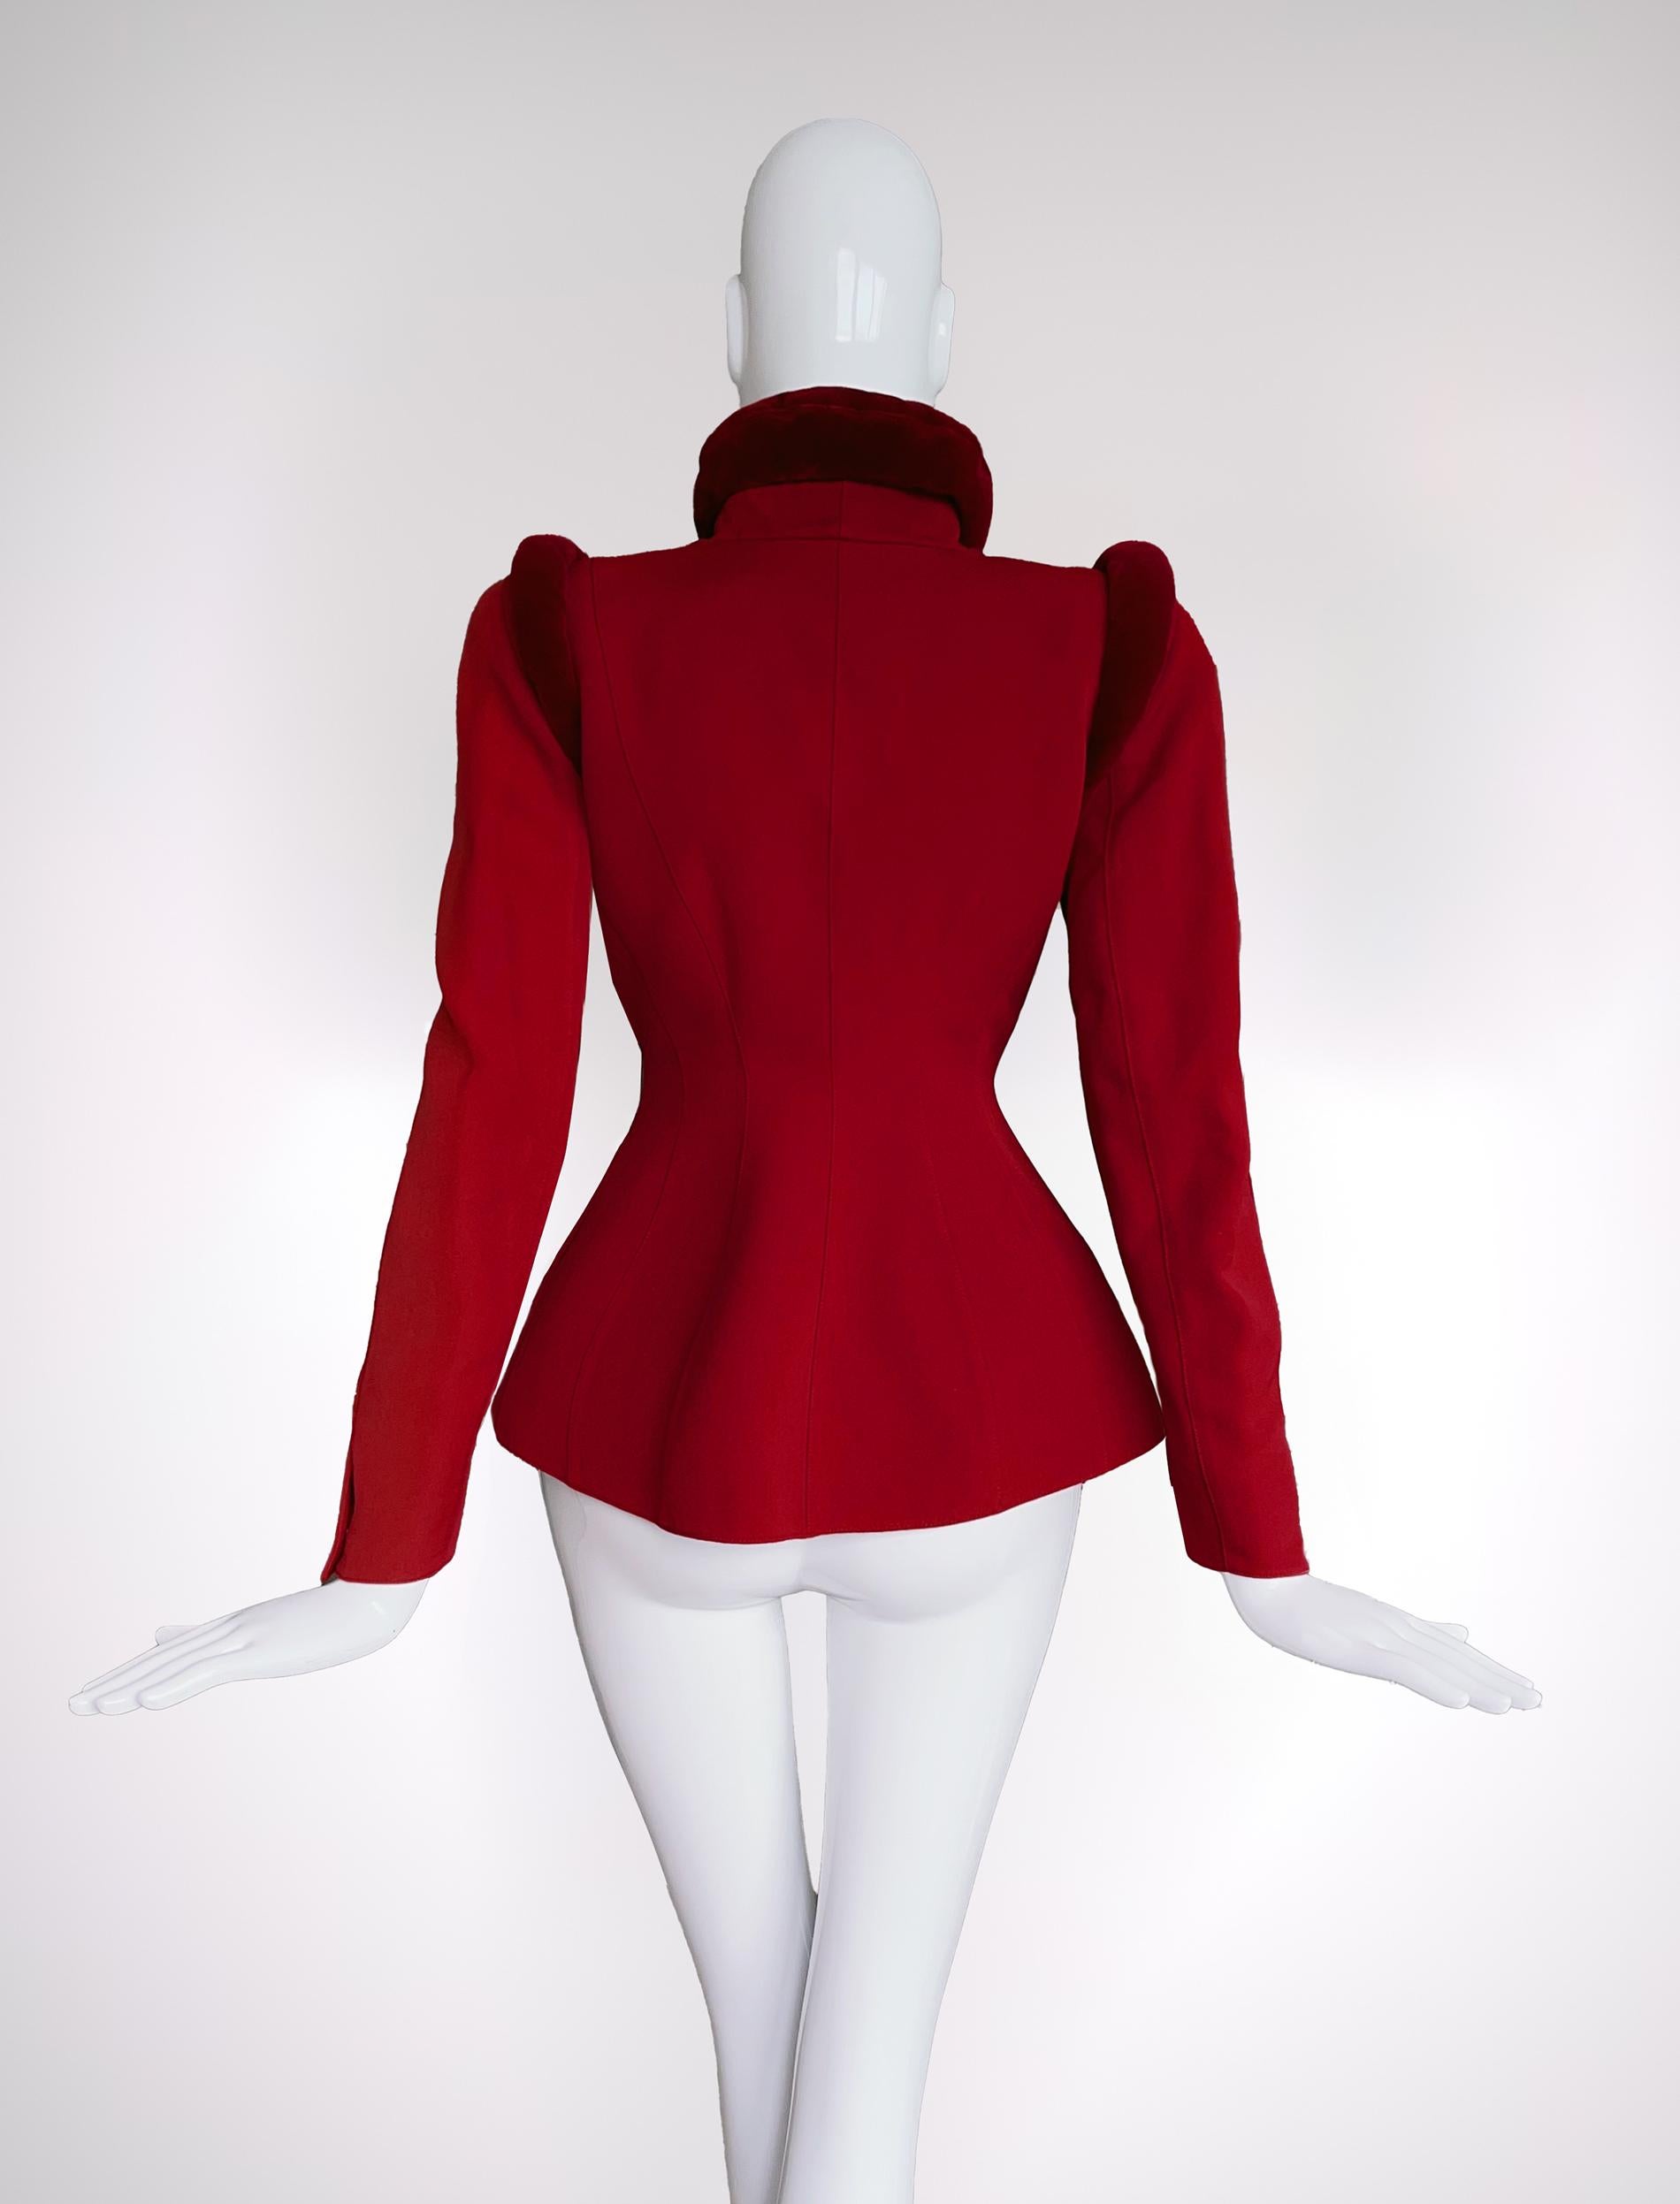 Women's Thierry Mugler Archival FW 1997 Jacket Dramatic Sculptural Velvet Red For Sale